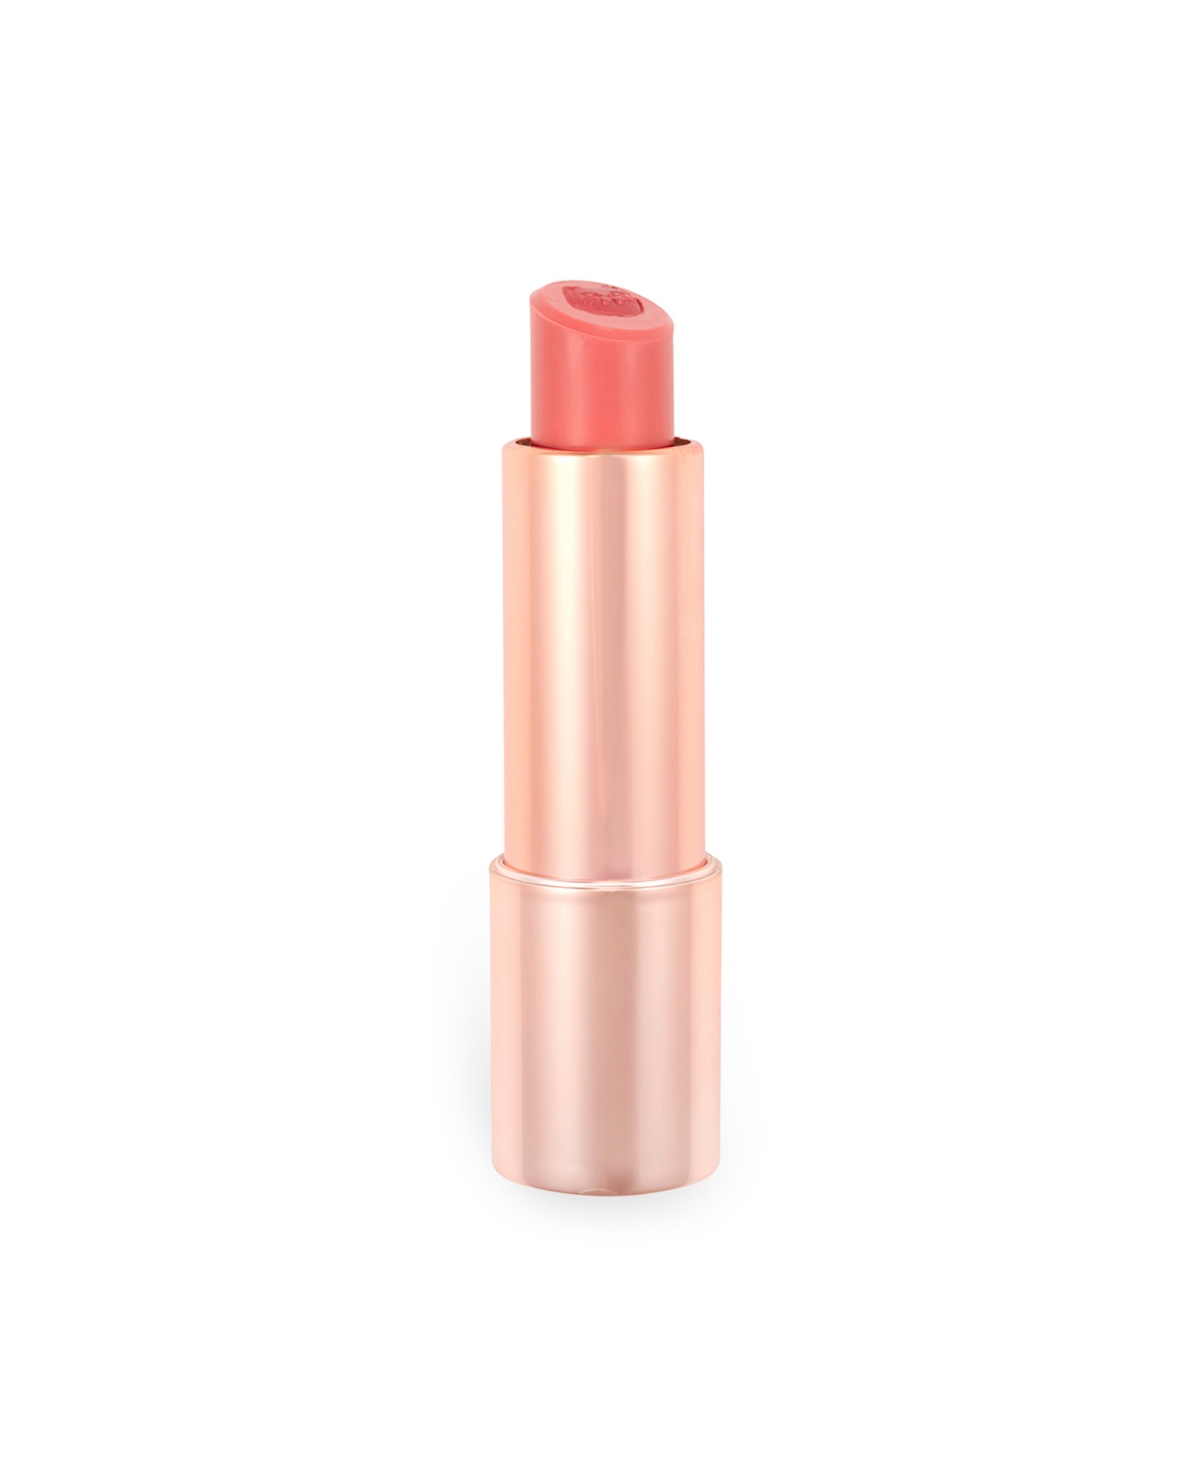 Purrfect Pout Lipstick - Kiss and Tail - sheer fuschia